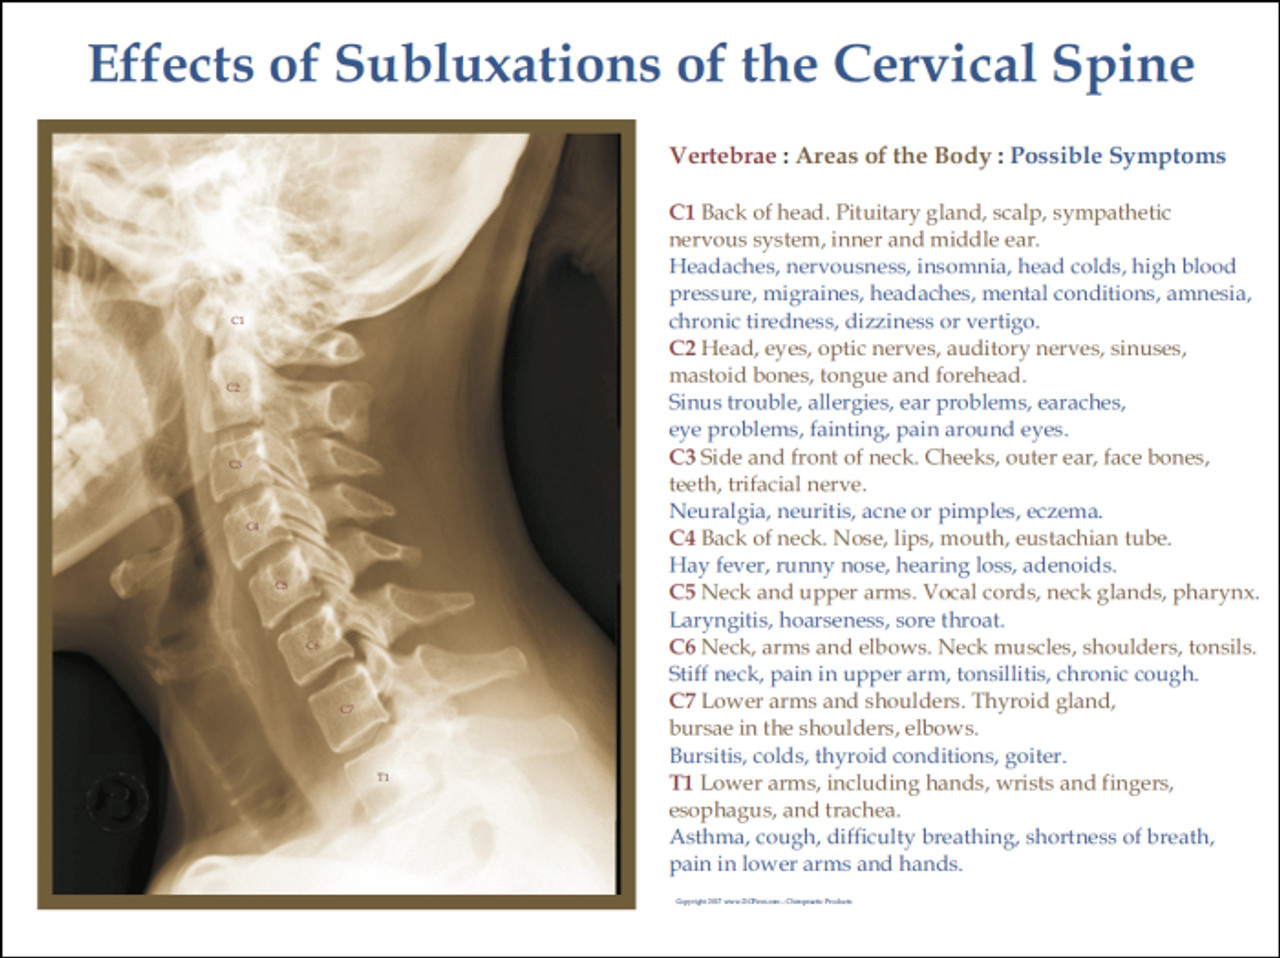 Cervical Spine Subluxation Effects Poster